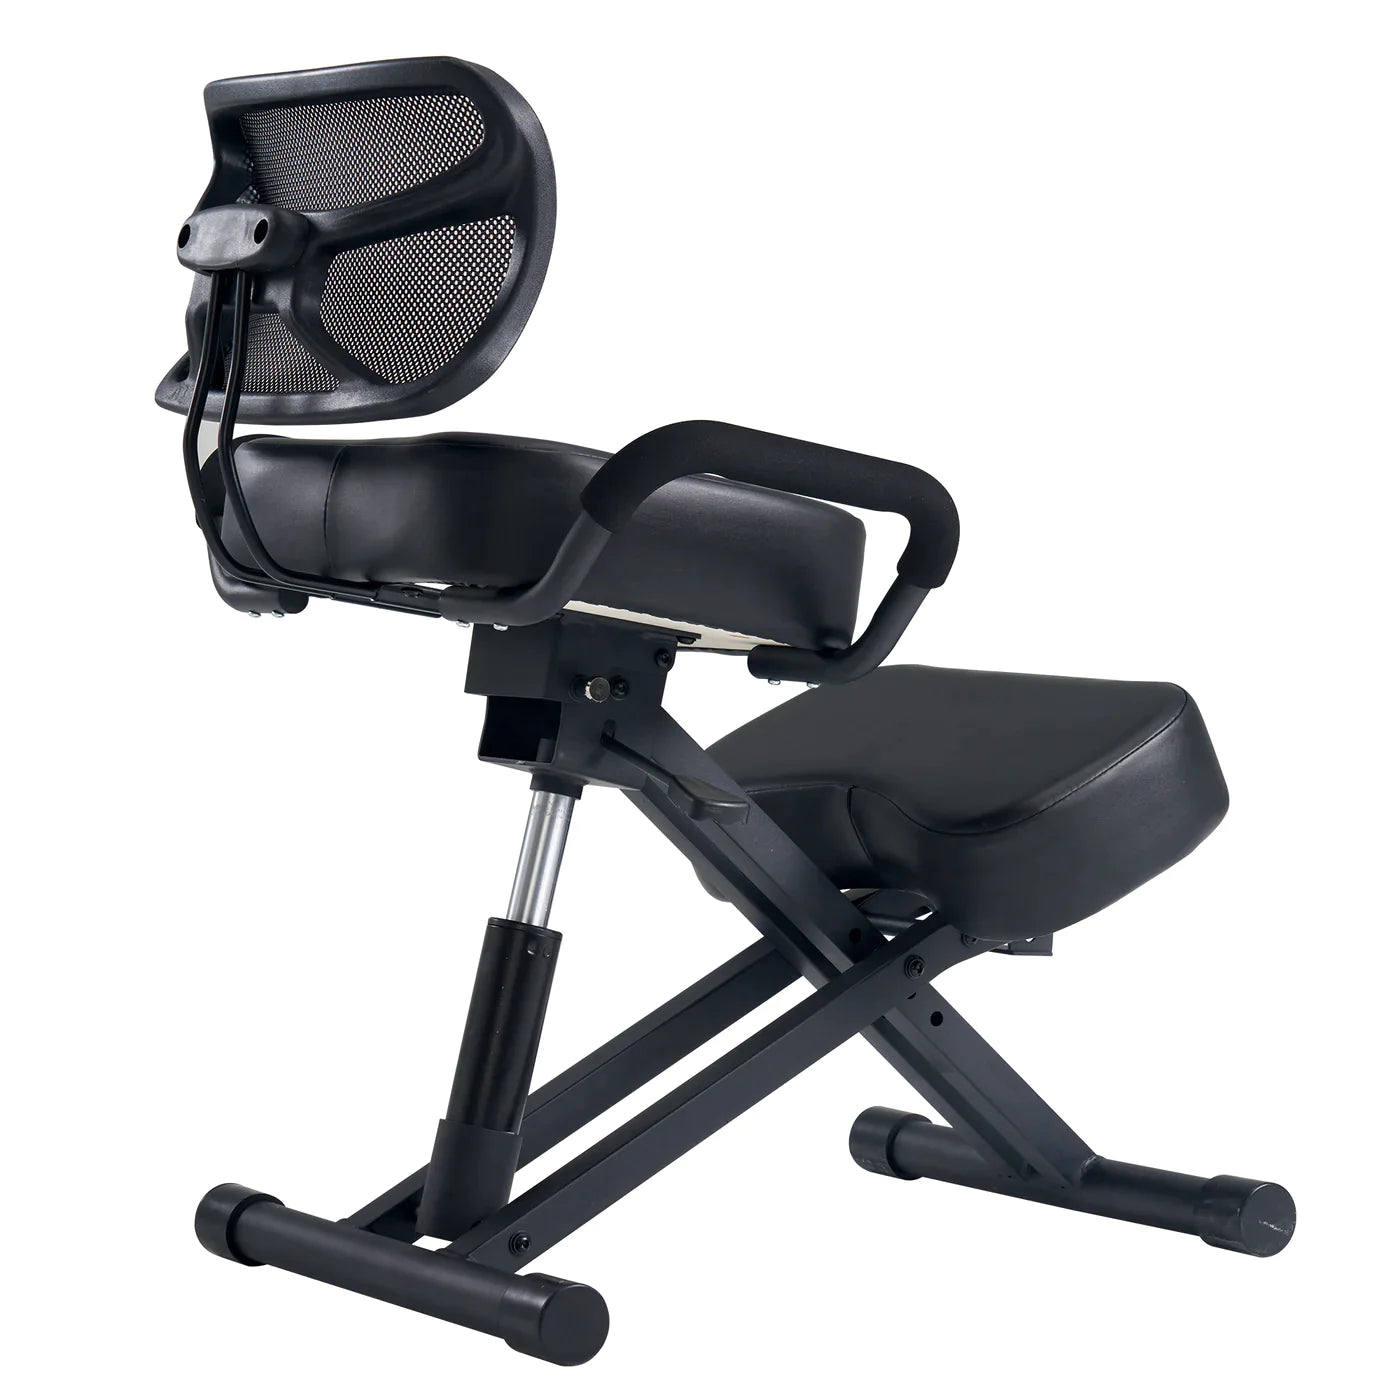 Bella2bello Ergonomic Kneeling Chair with Back Support for Office -Posture Chair with Angled Seat and Backrest for Home and Office-Posture Correction Stool-Improve Your Posture